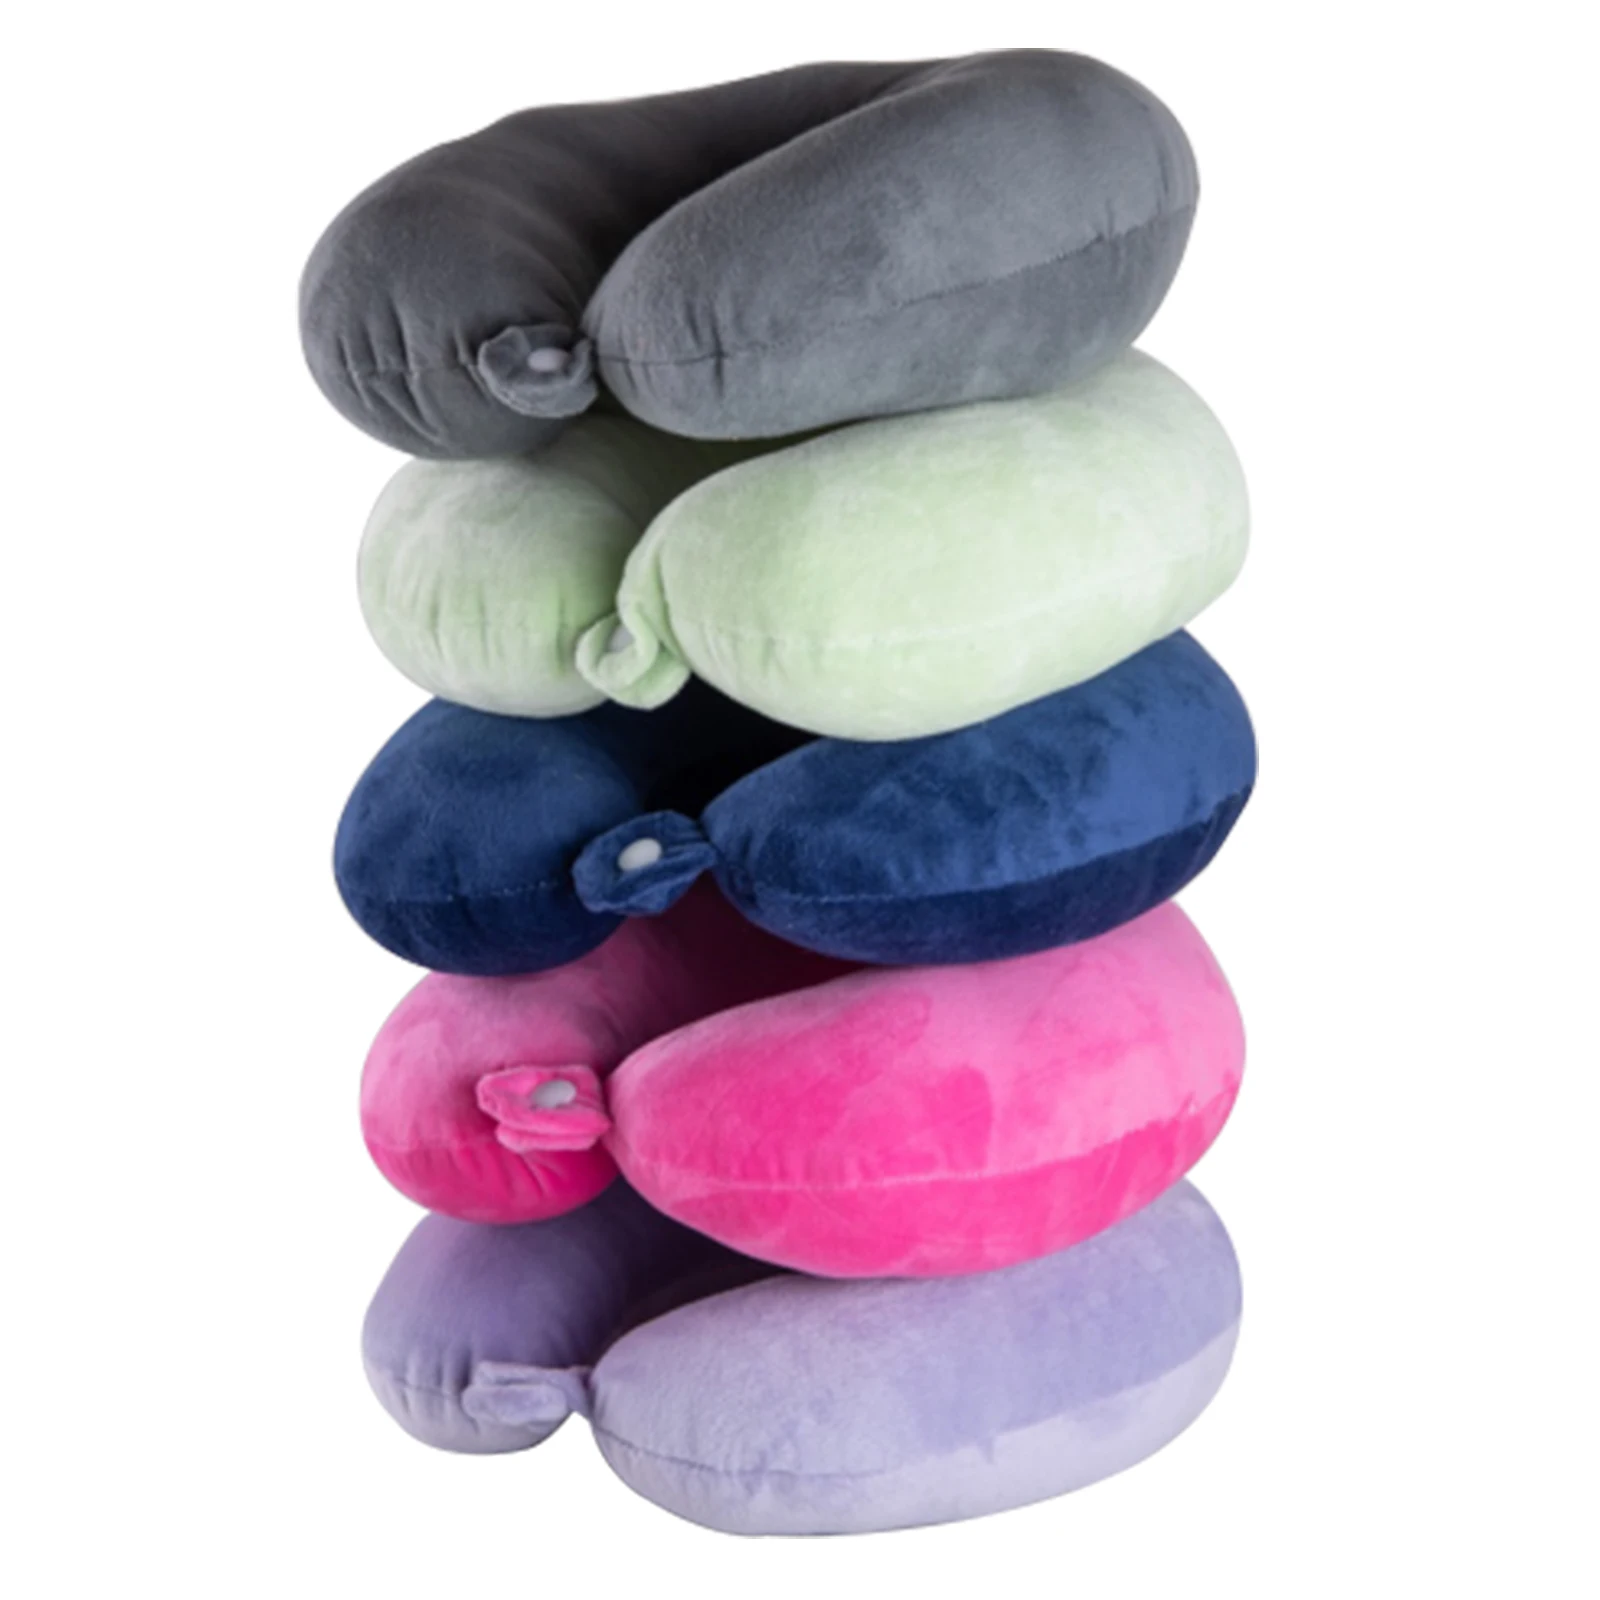 MISSJIAN Breathable Comfortable Neck Pillow Velour Soft U Shaped Pillow,Neck Support Cushion,Suitable for Head and Neck Support